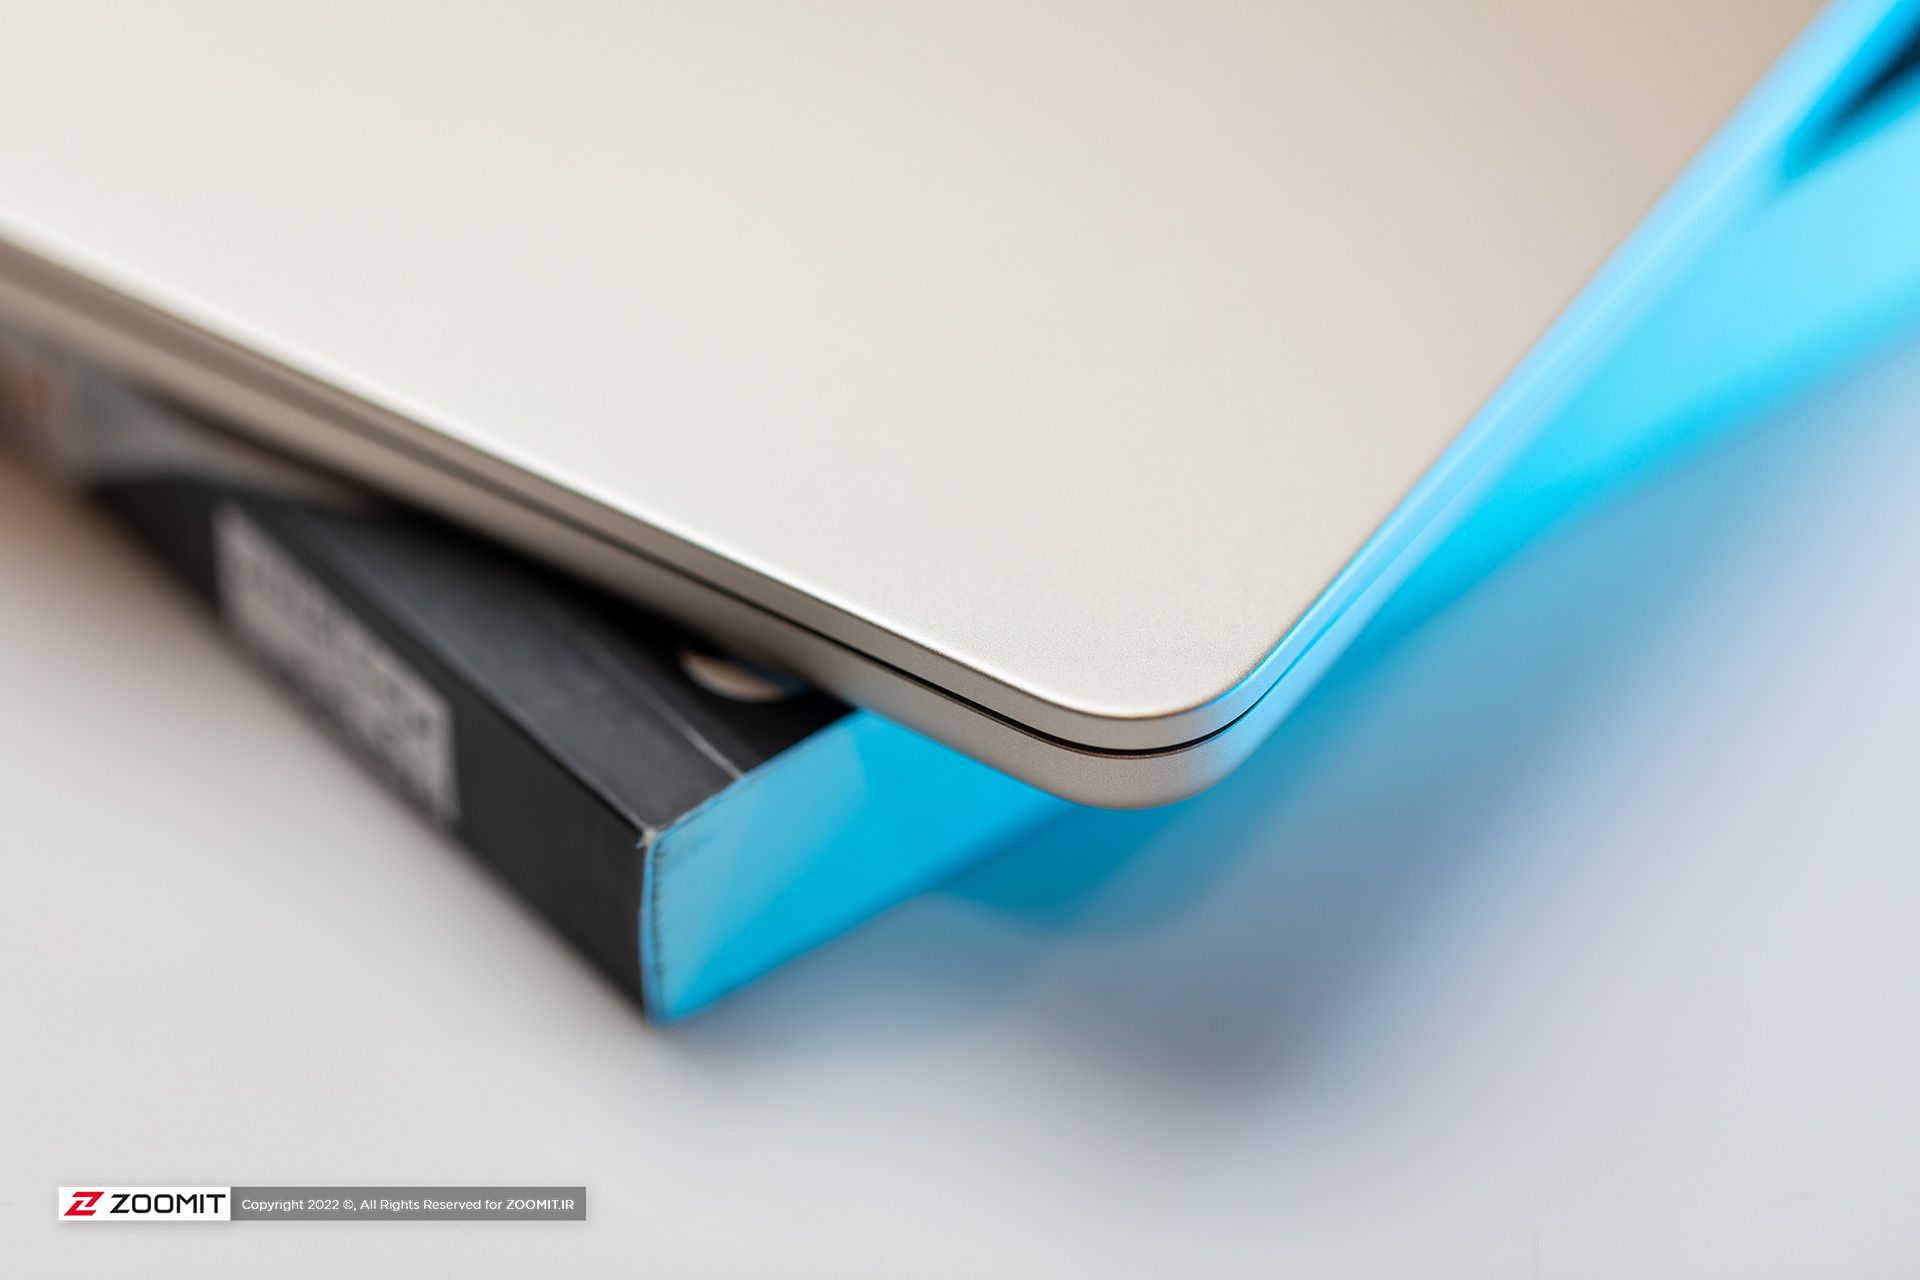 The rounded corners of the MacBook Air M2